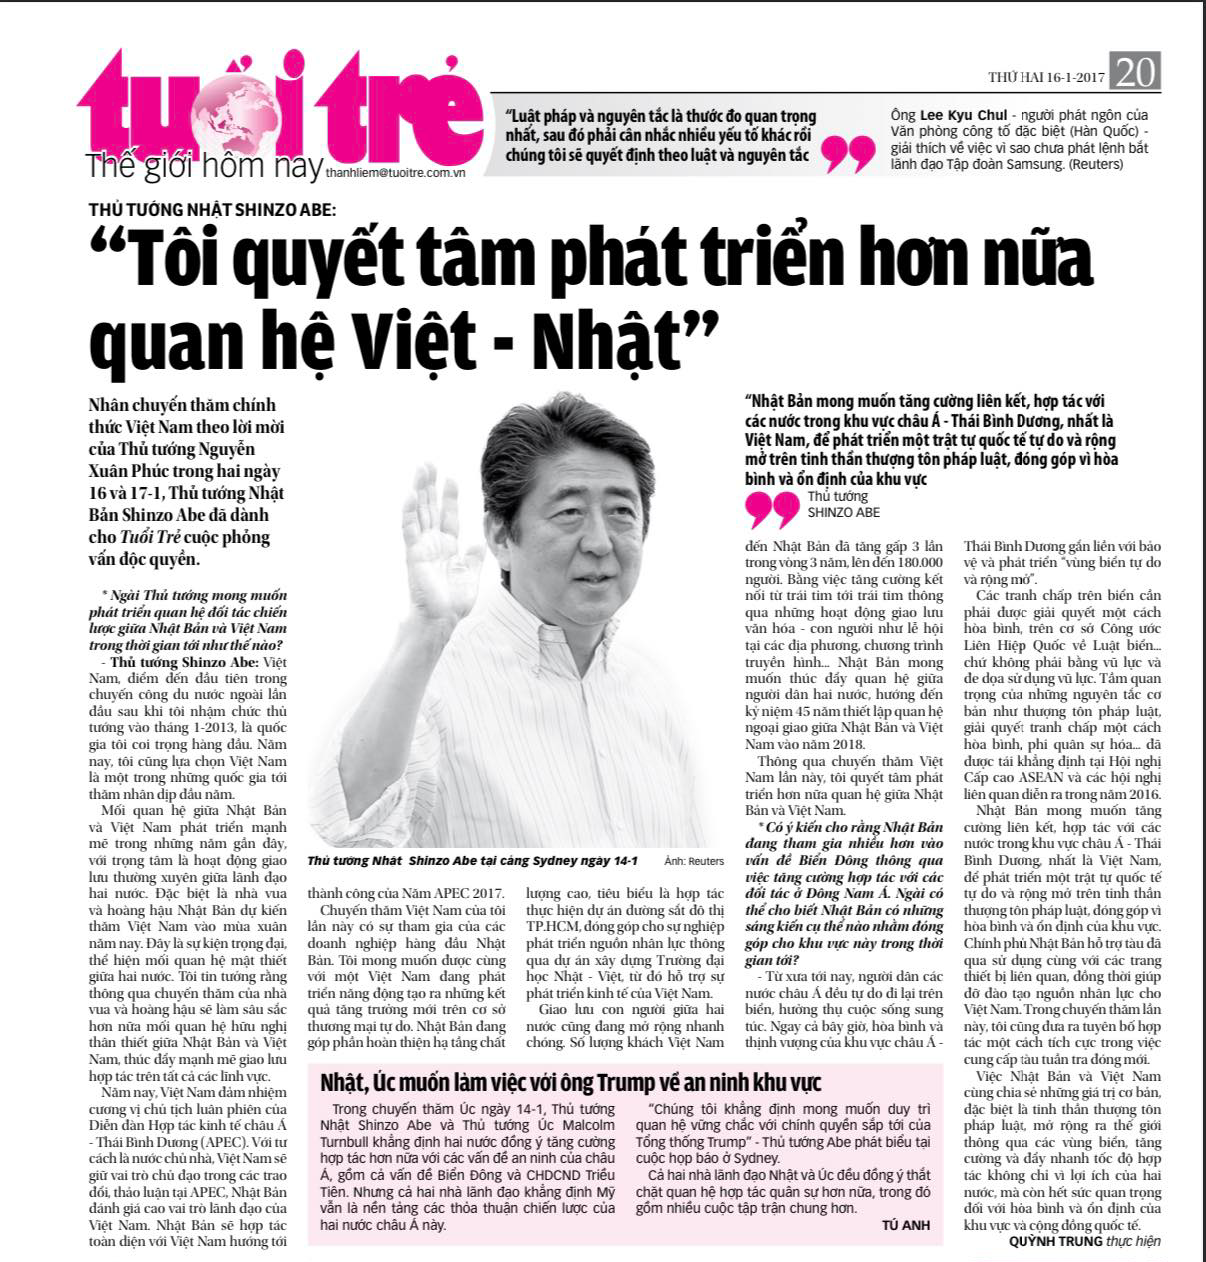 An interview with Japanese Prime Minister Shinzo Abe is published on Tuoi Tre Daily on January 16, 2017. File photo: Tuoi Tre